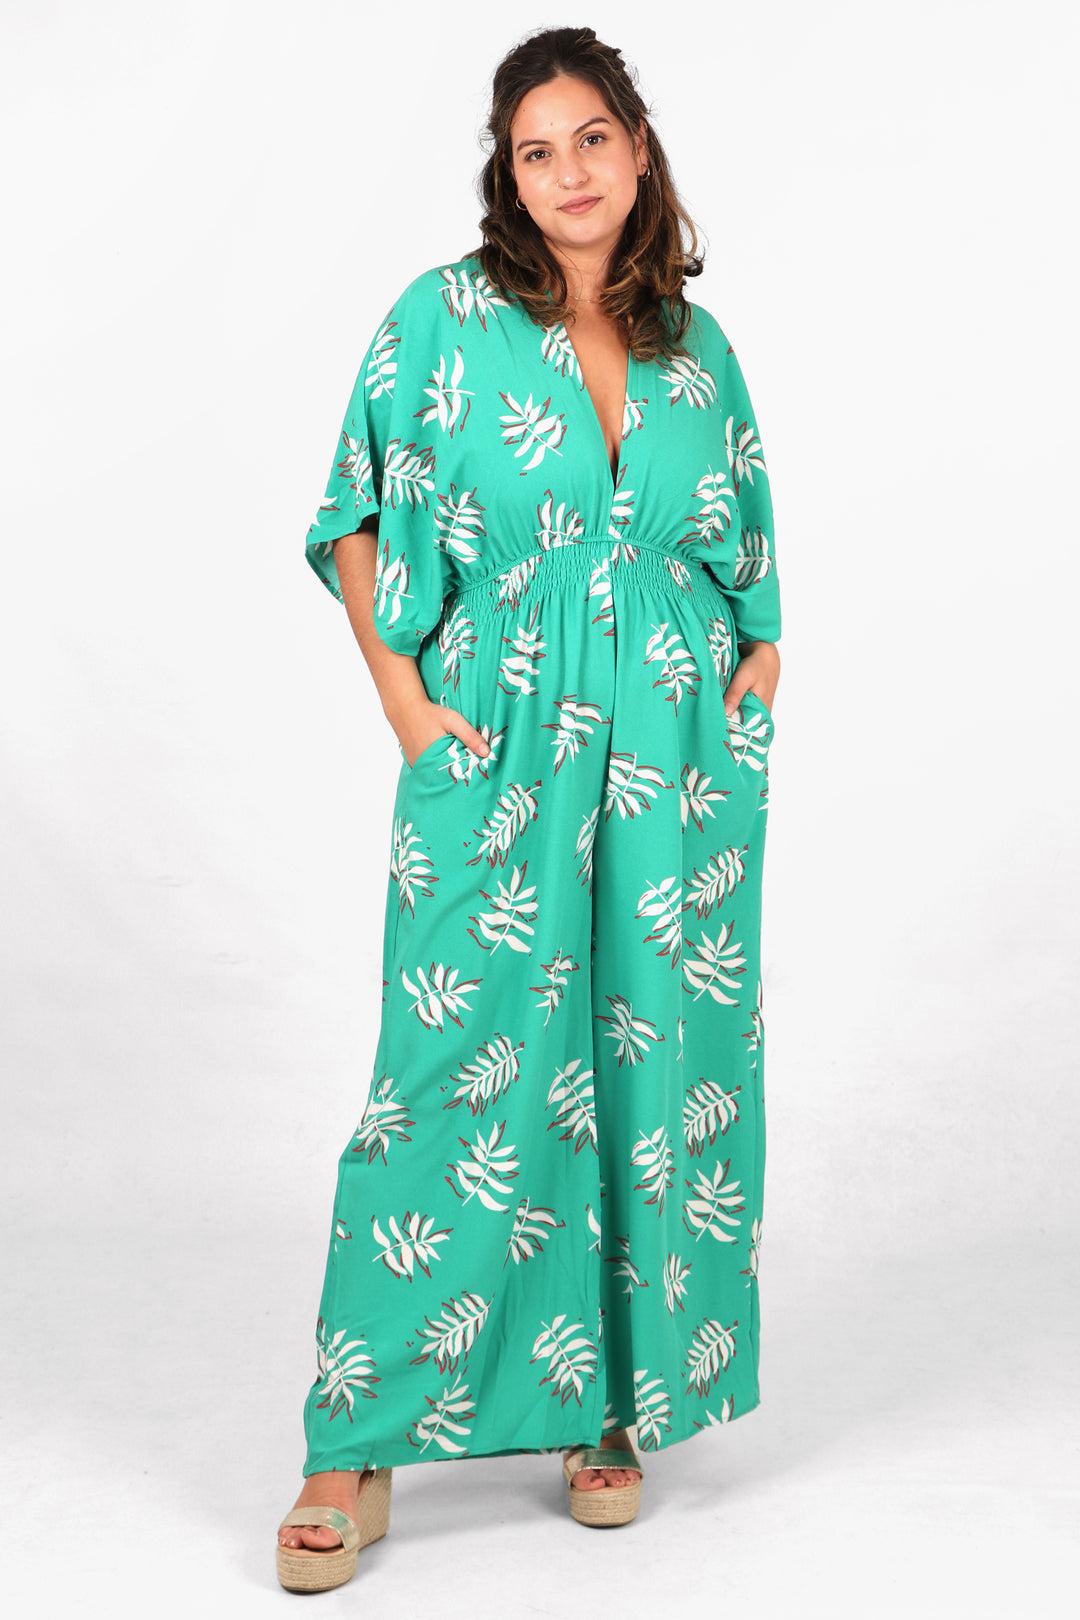 model wearing a mint green jumpsuit with an all over pattern of white palm leaves. the jumpsuit has a deep v neck, elbow length angel sleeves and a shirred waist